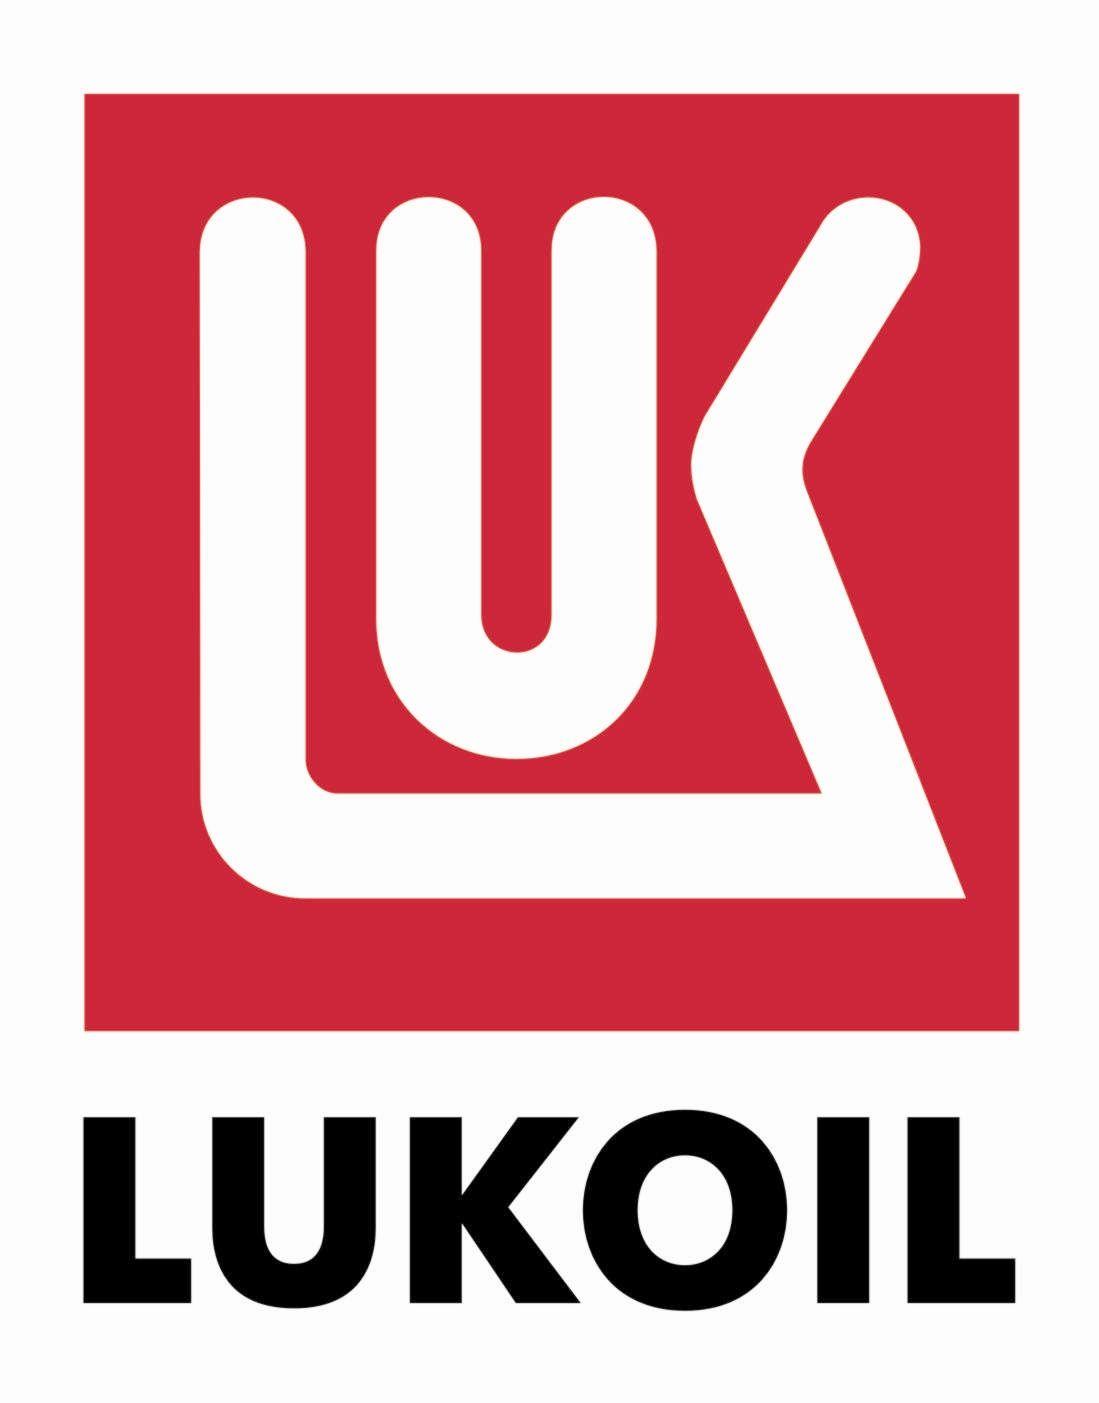 Red Oil Company Logo - Lukoil. GAS AND OIL IN LIVING COLOR. Oil company logos, Energy